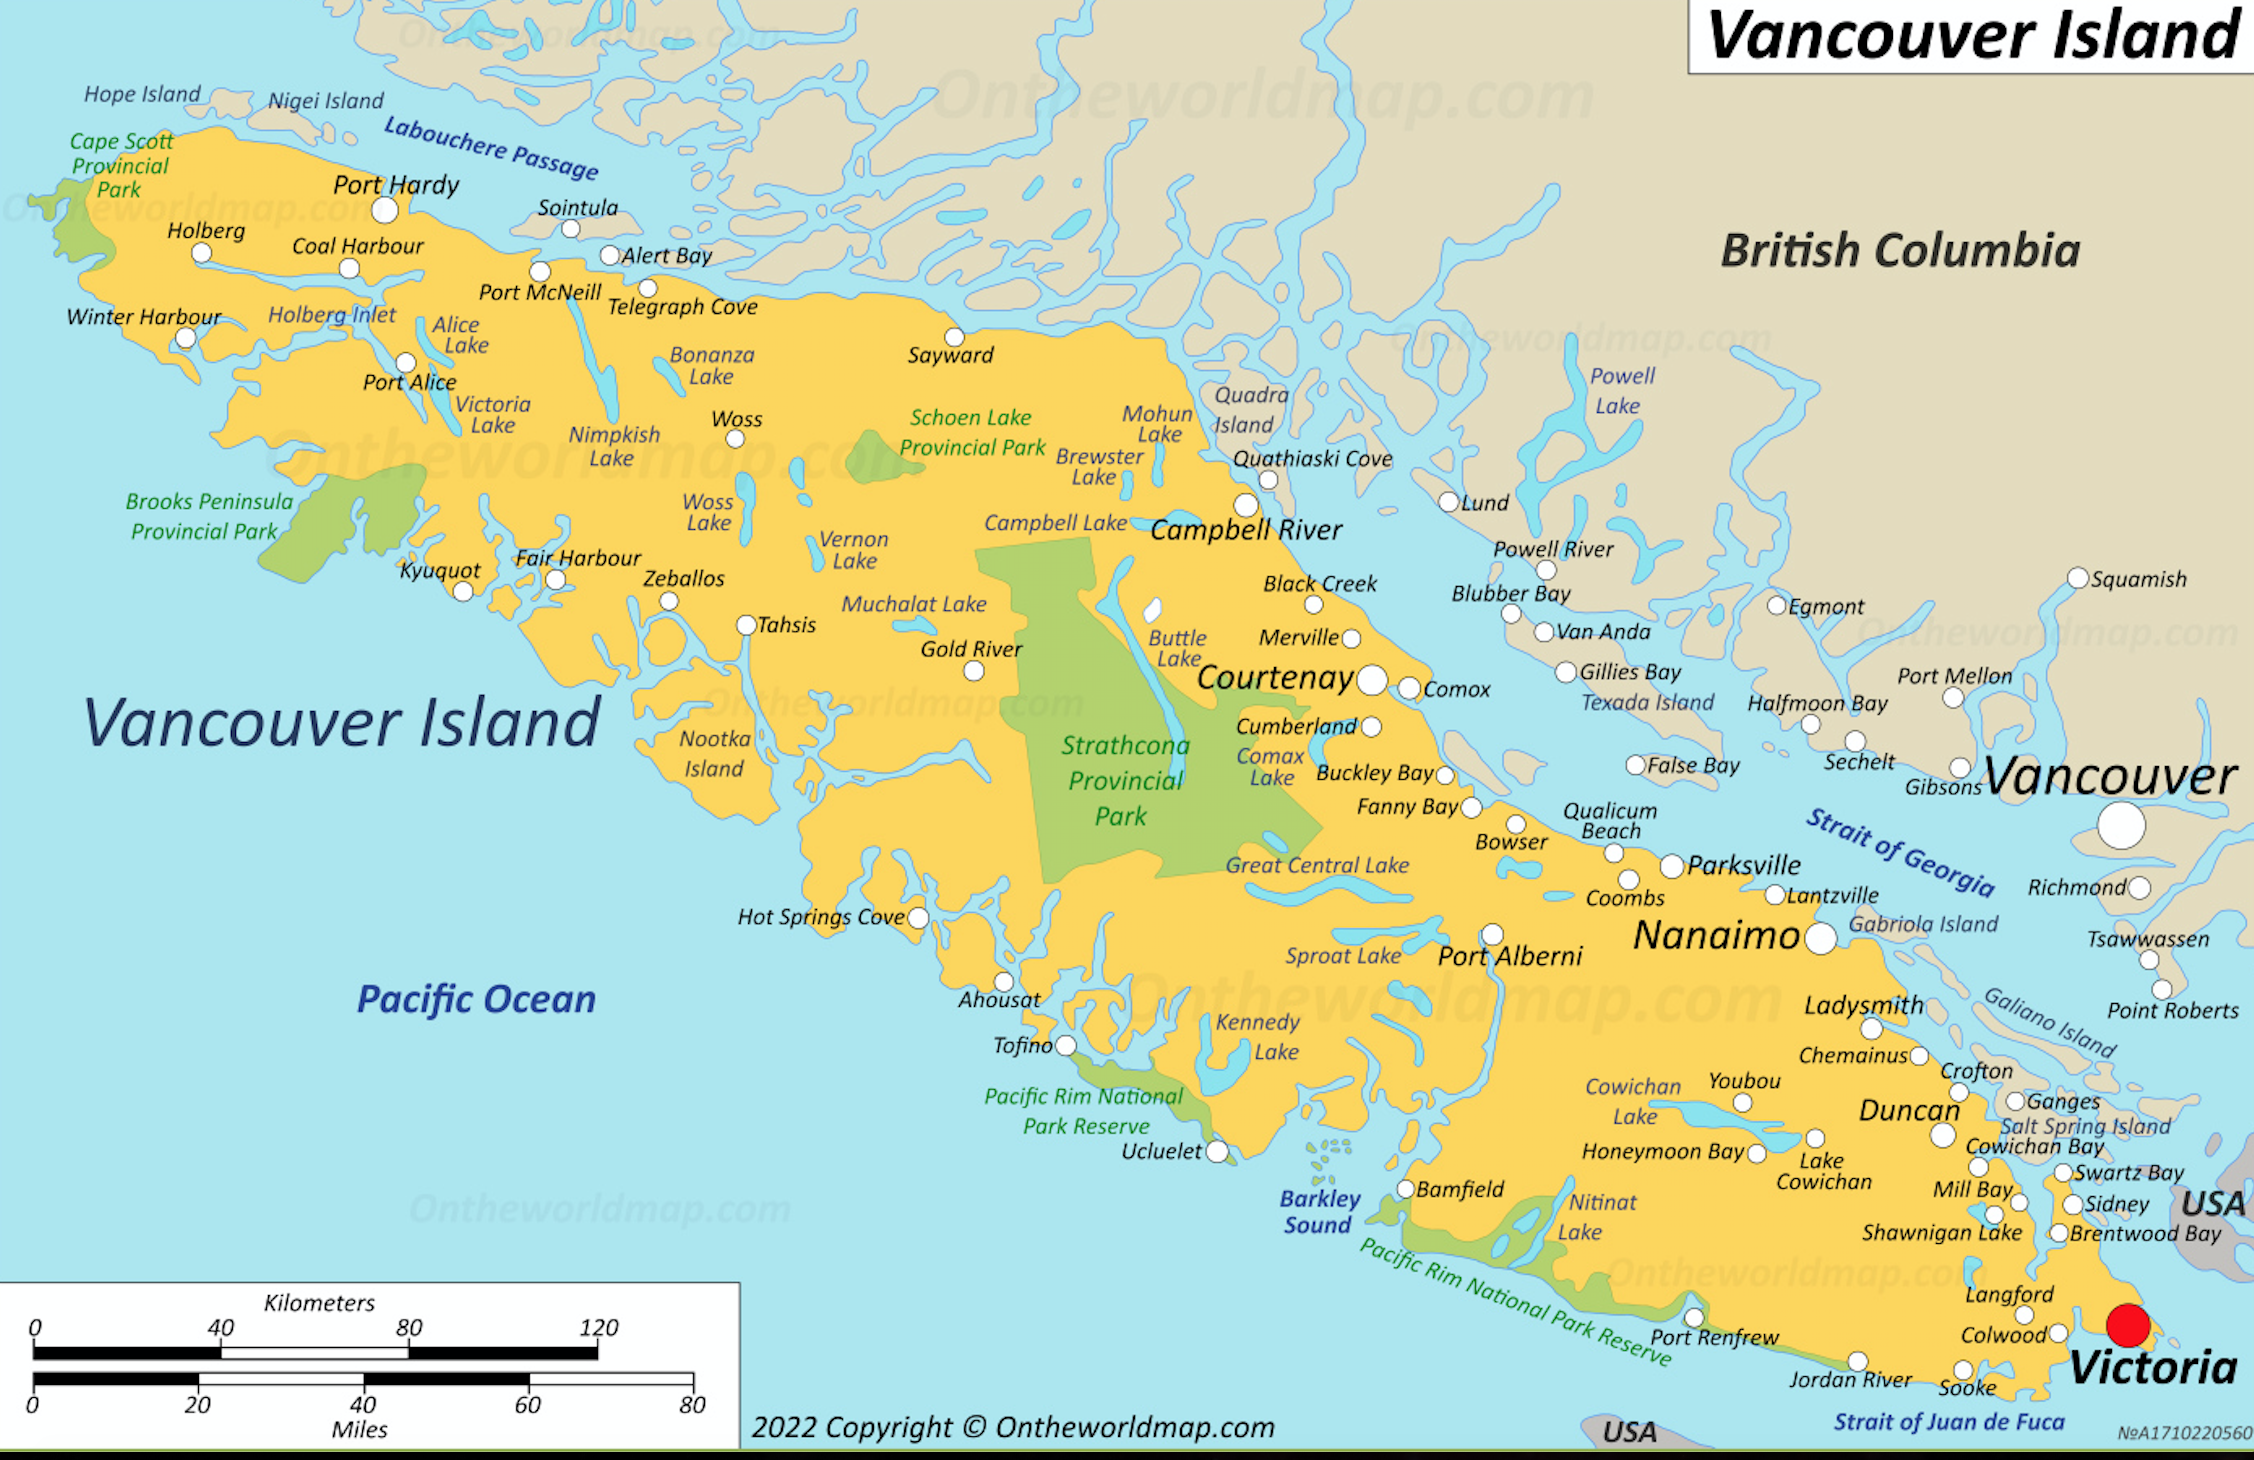 A map of Vancouver Island